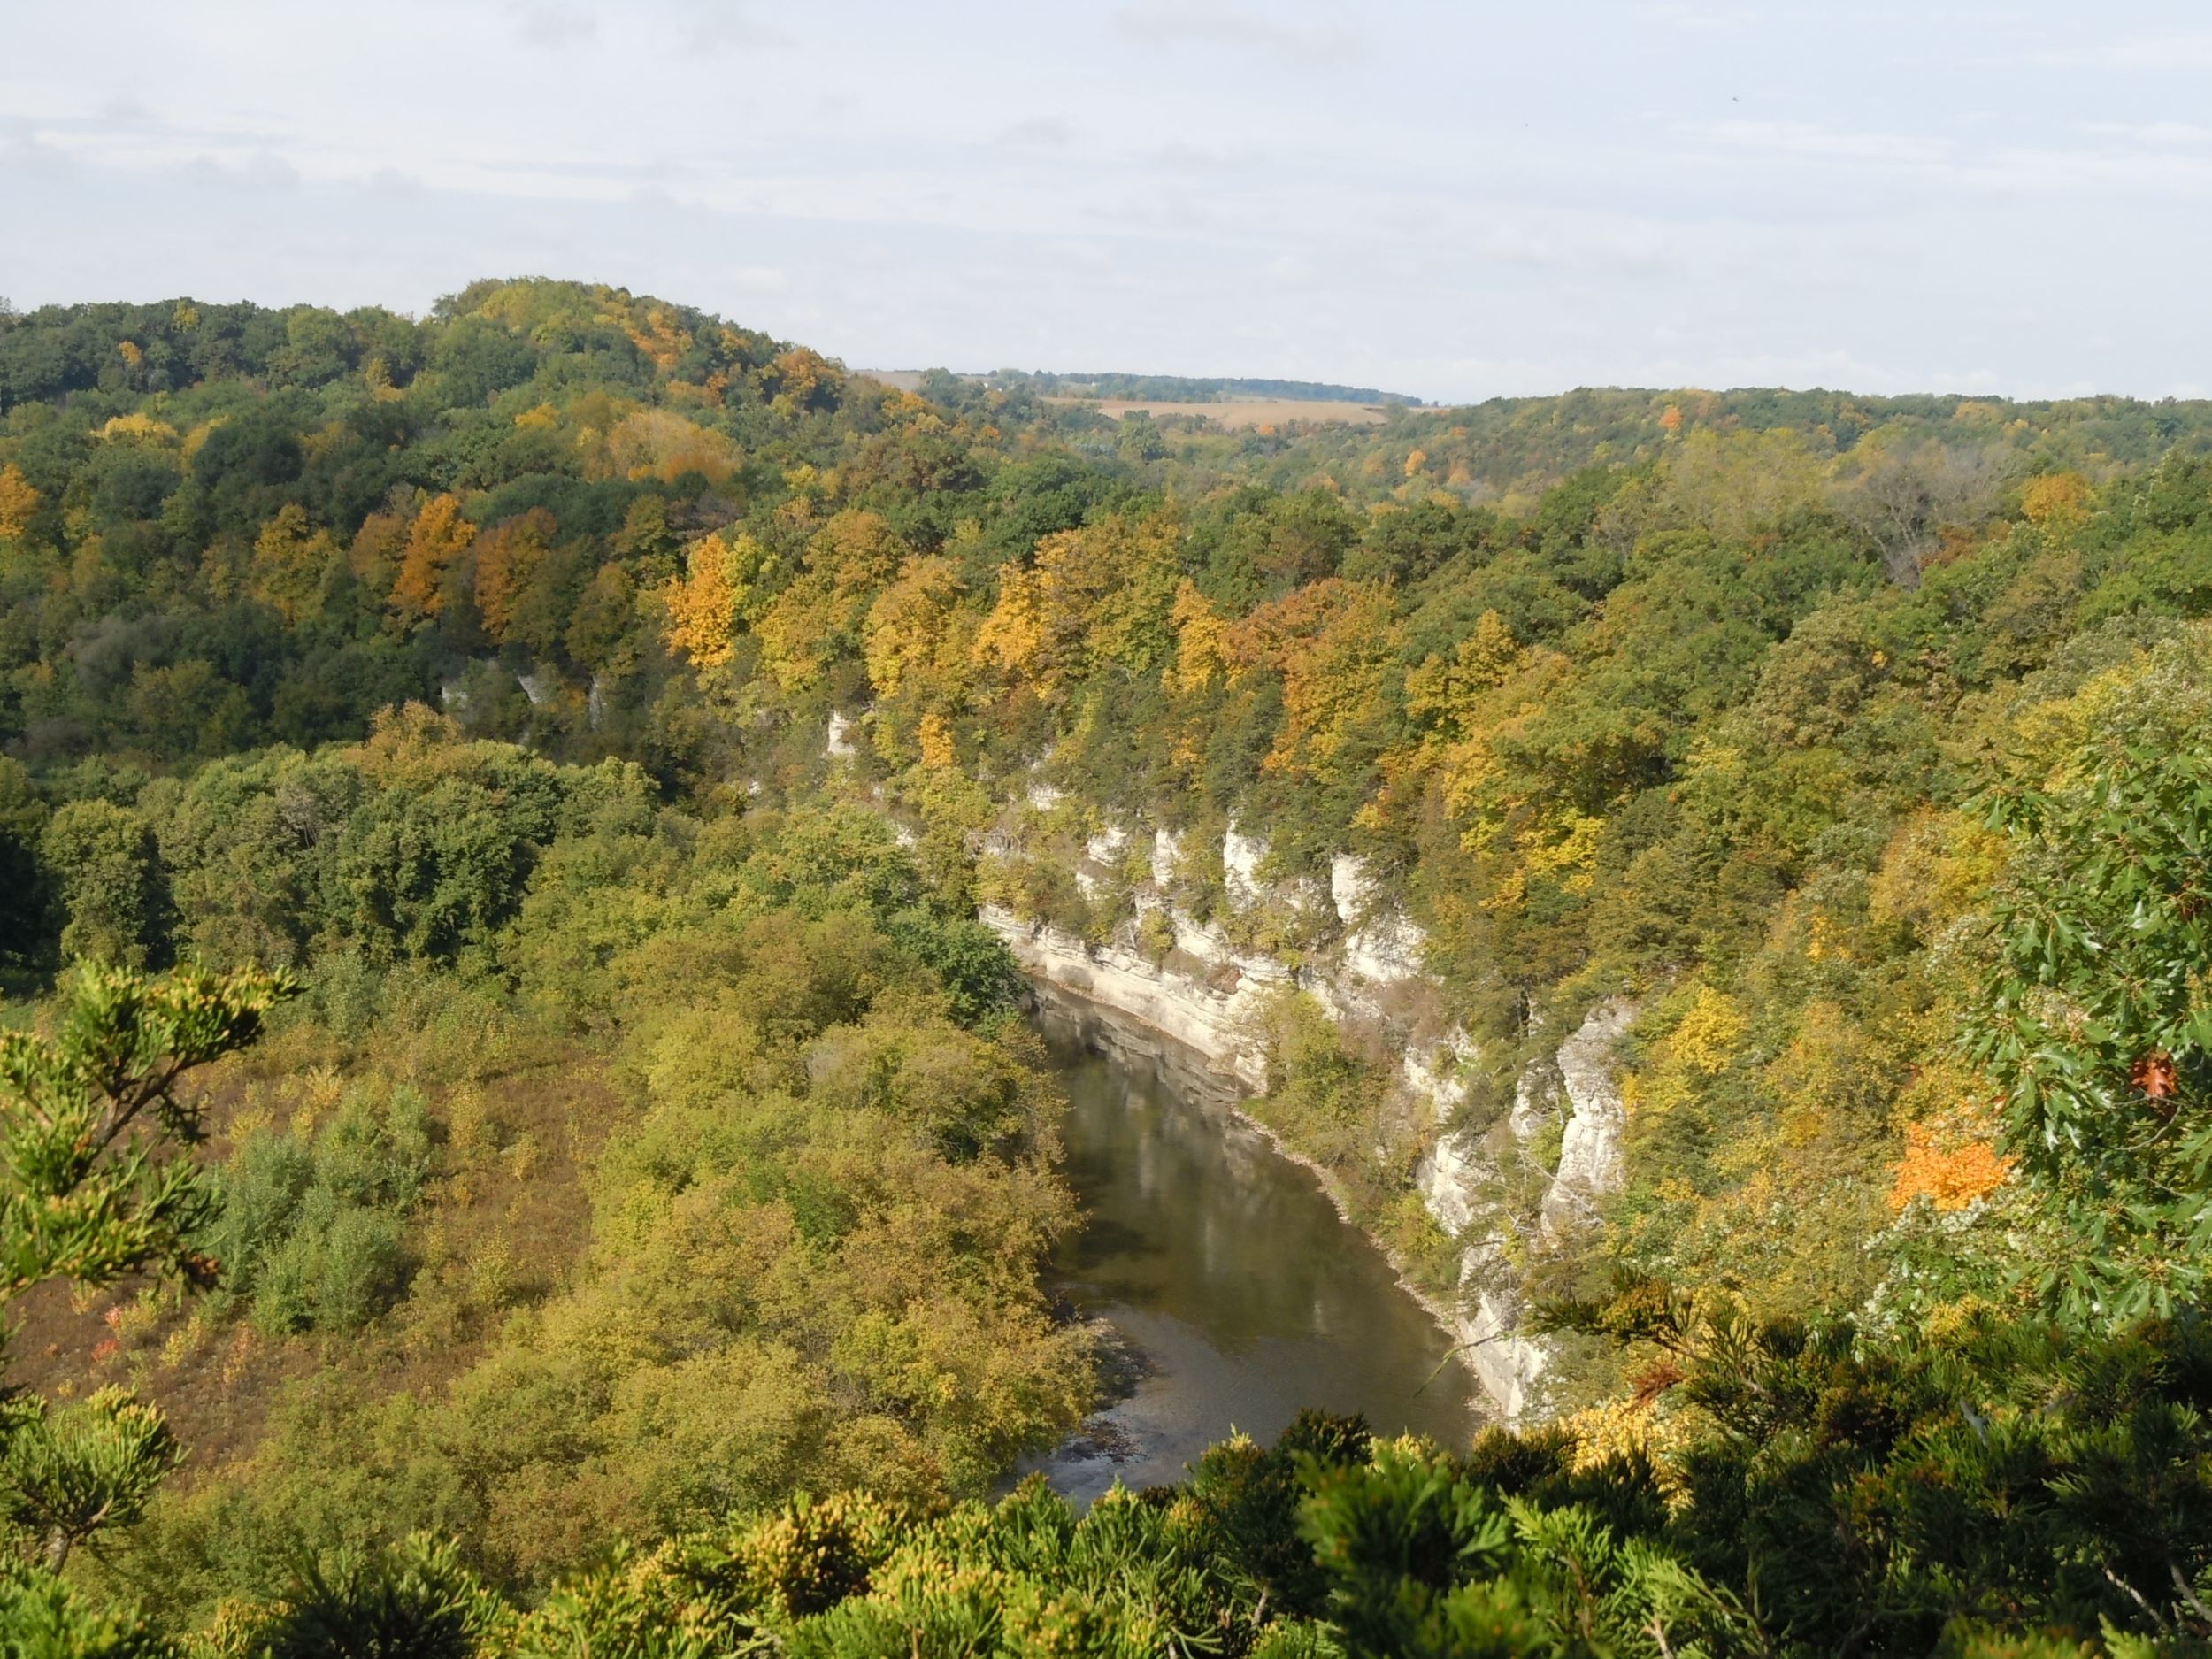 Chimney Rocks conservation easement protects viewshed along Upper Iowa River